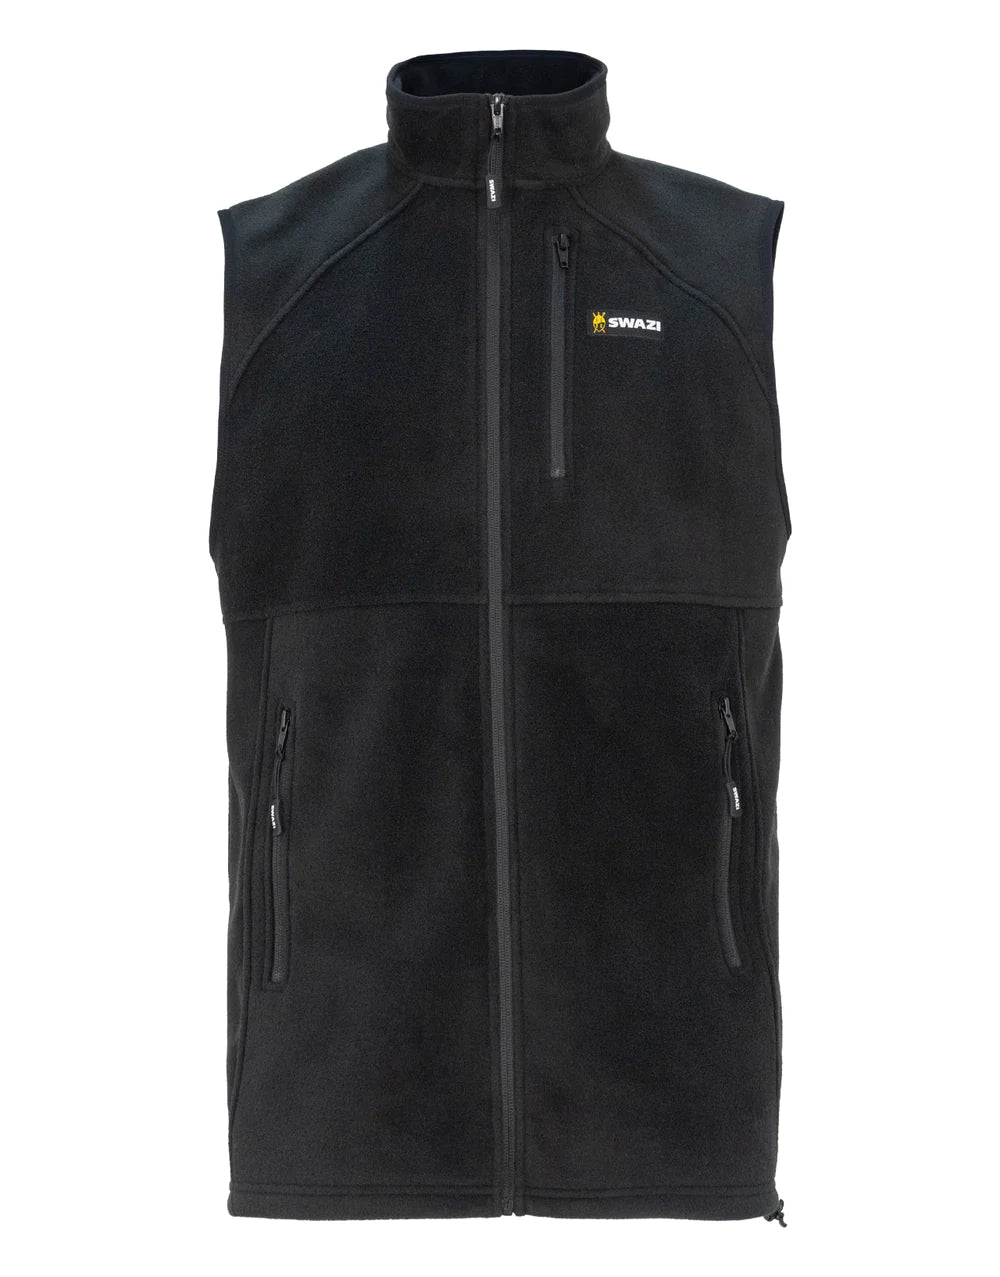 Swazi Sherpa Vest - S / BLACK - Mansfield Hunting & Fishing - Products to prepare for Corona Virus